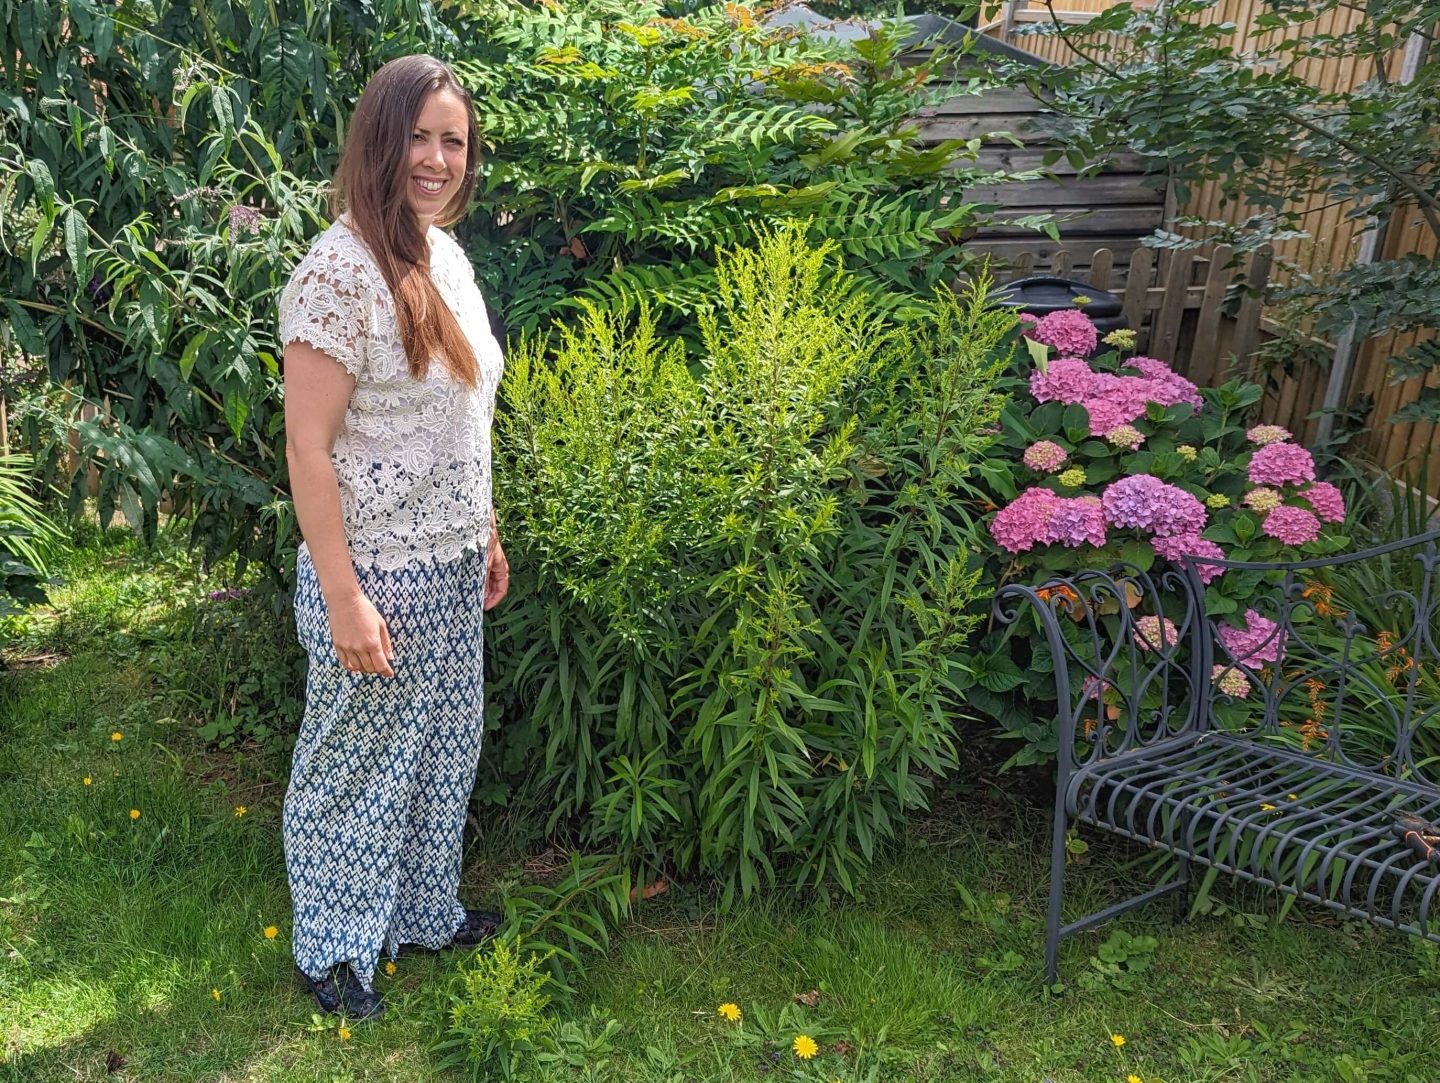 Natalie standing in the garden wearing Cotton Traders Jasmine Harman Collection top in natural colour and patterned blue trousers from the same collection